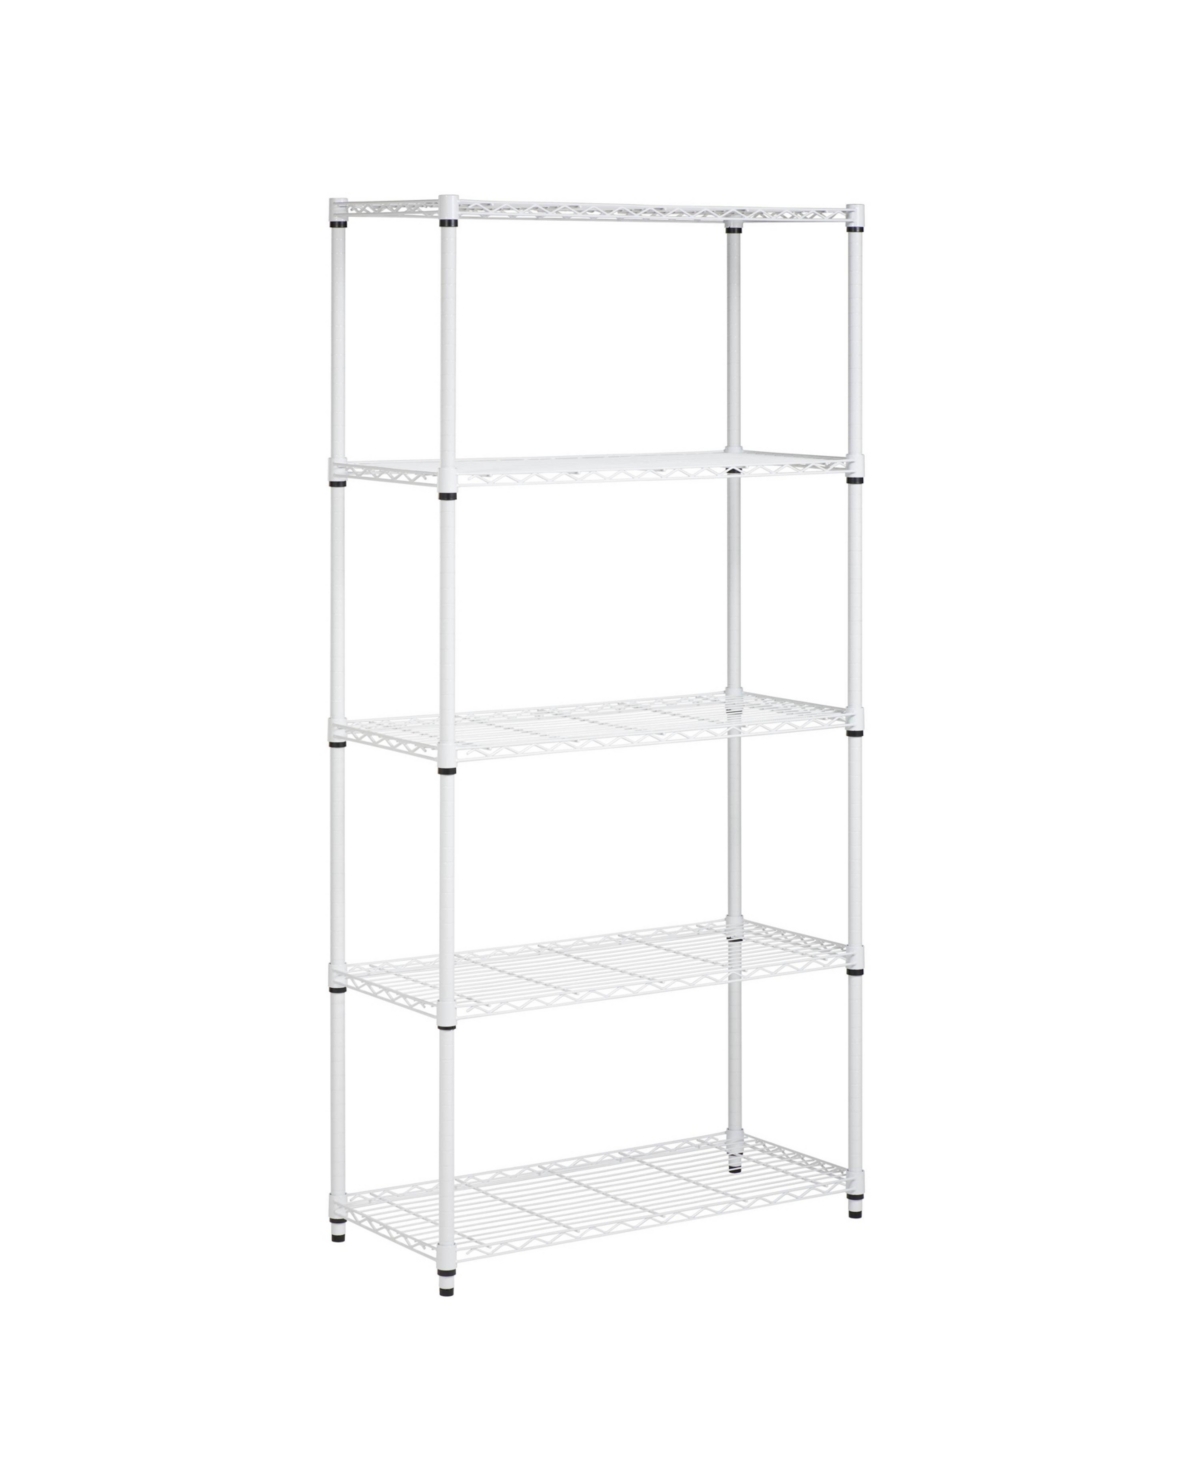 Honey Can Do Heavy Duty 5 Tier Adjustable Shelving Unit In White